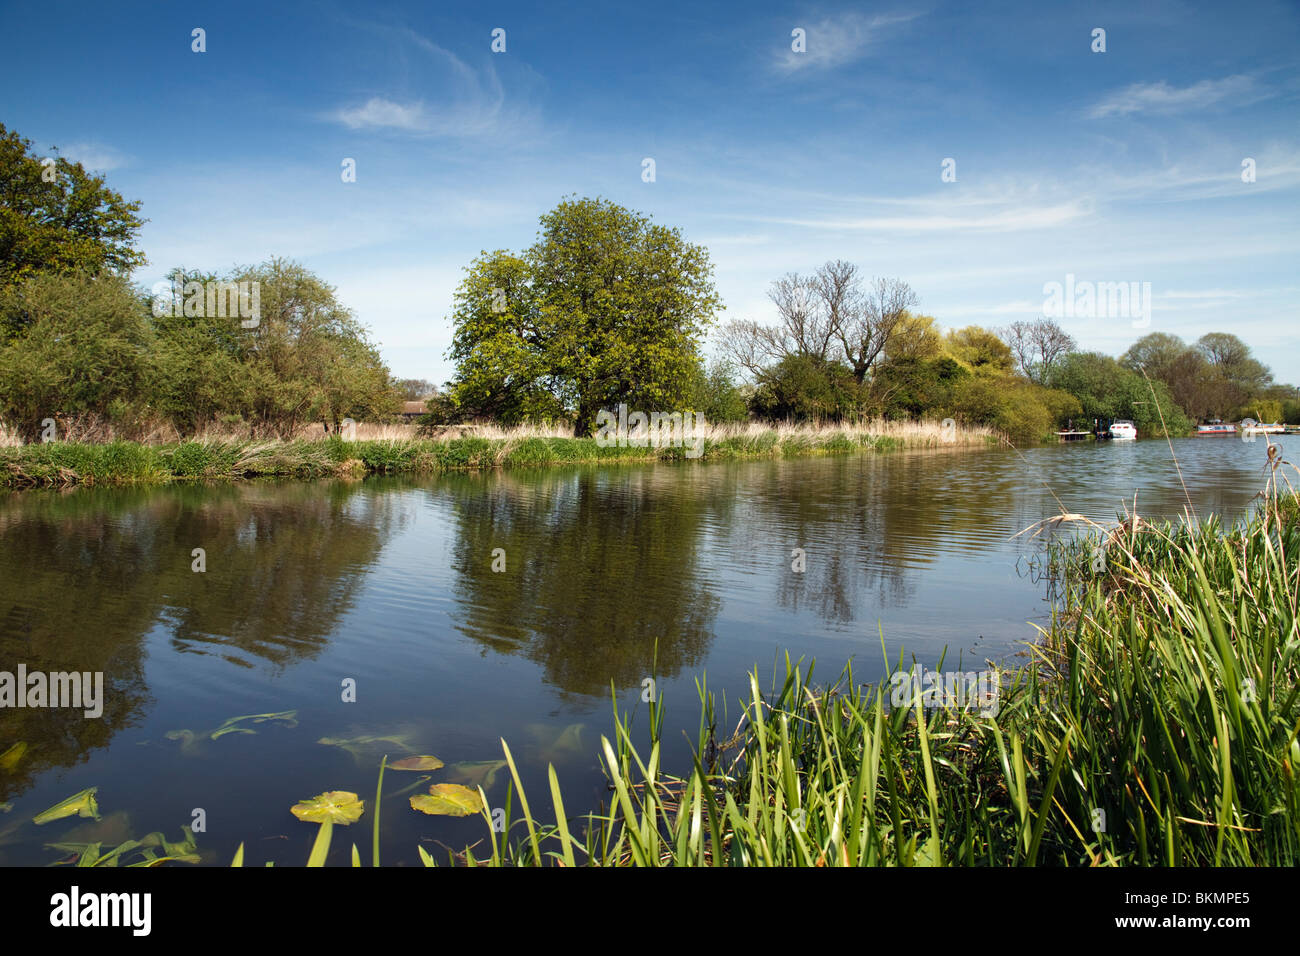 The River Ouse The Meadows Near Houghton Village In Cambridgeshire, East Anglia England The United Kingdom UK Stock Photo